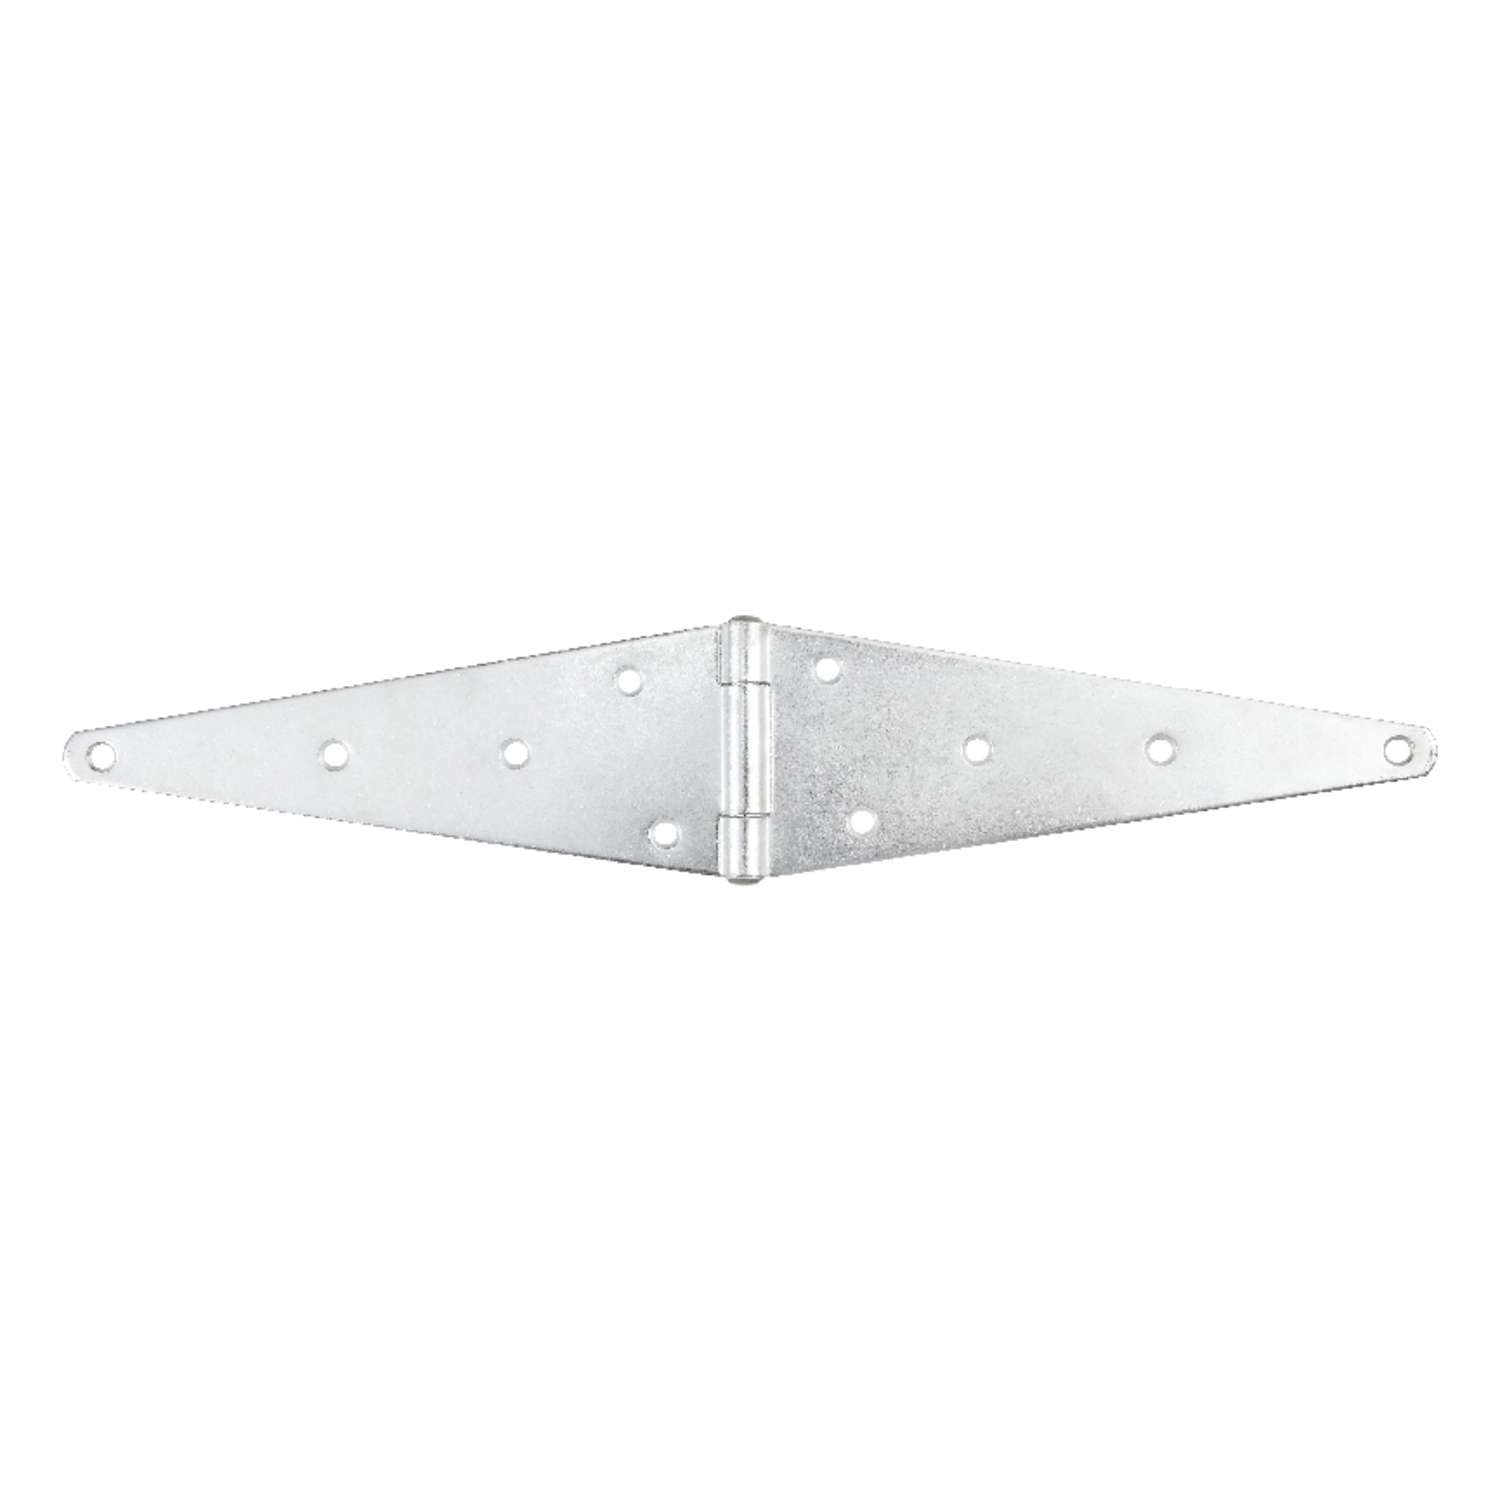 HAGER Heavy DUTY 12" Strap Hinge in Zinc plated 